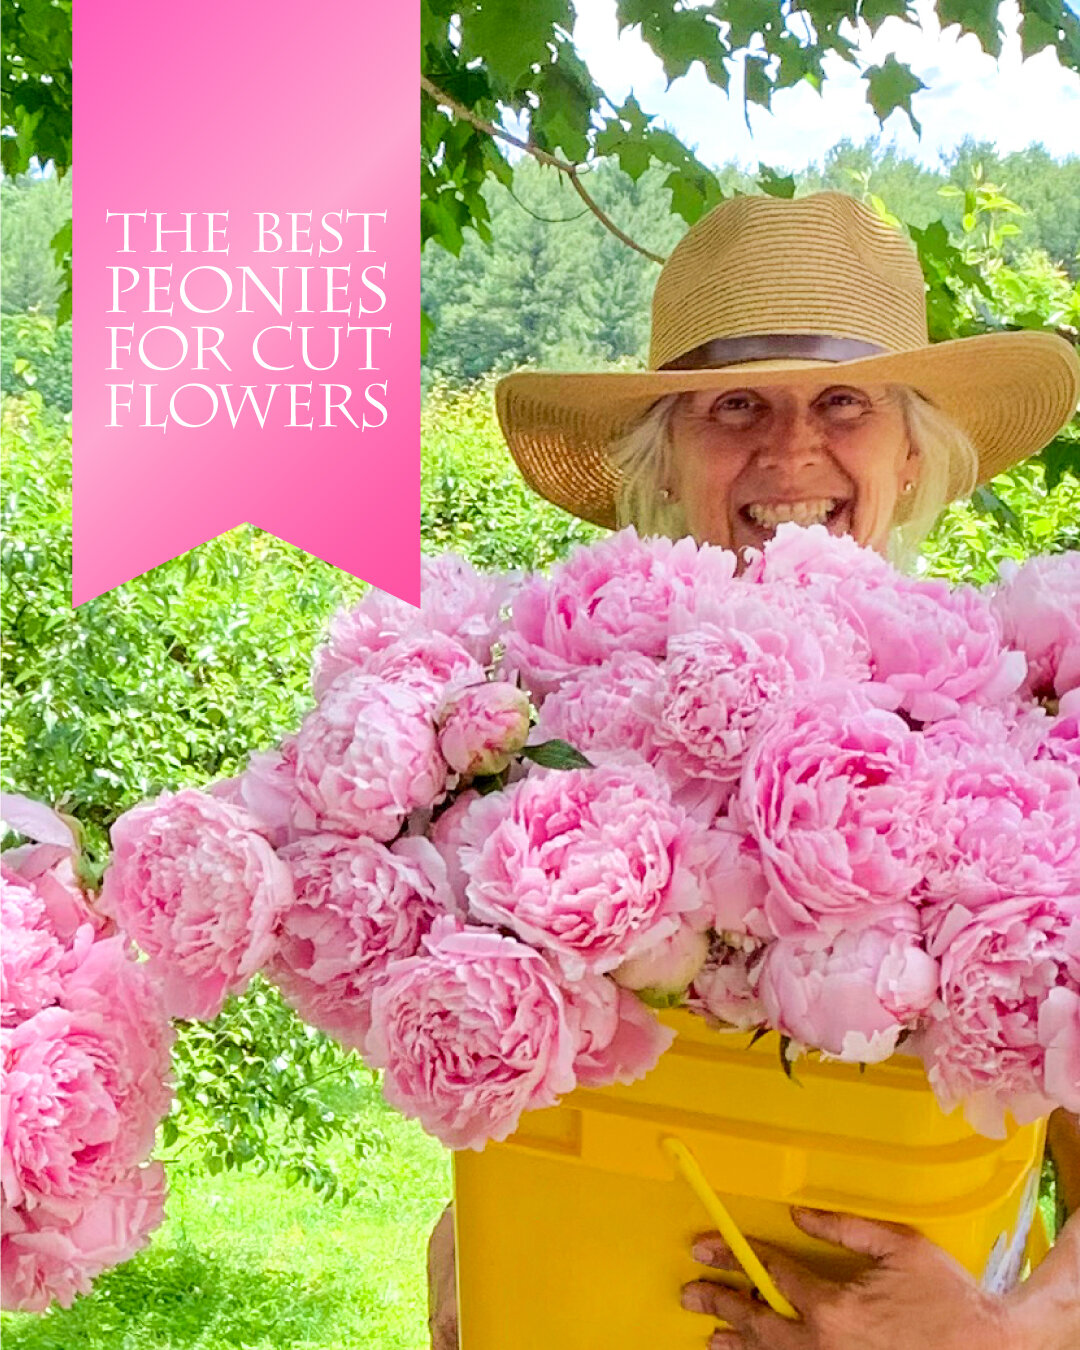 Calling All Flower Farmers! Our best peonies to grow for cut flowers are now available in bulk. 10 plants at a huge savings. Limited quantities, while supplies last. Find all of them at peonysenvy.com on our 'Peony Packs &amp; Bulk' page